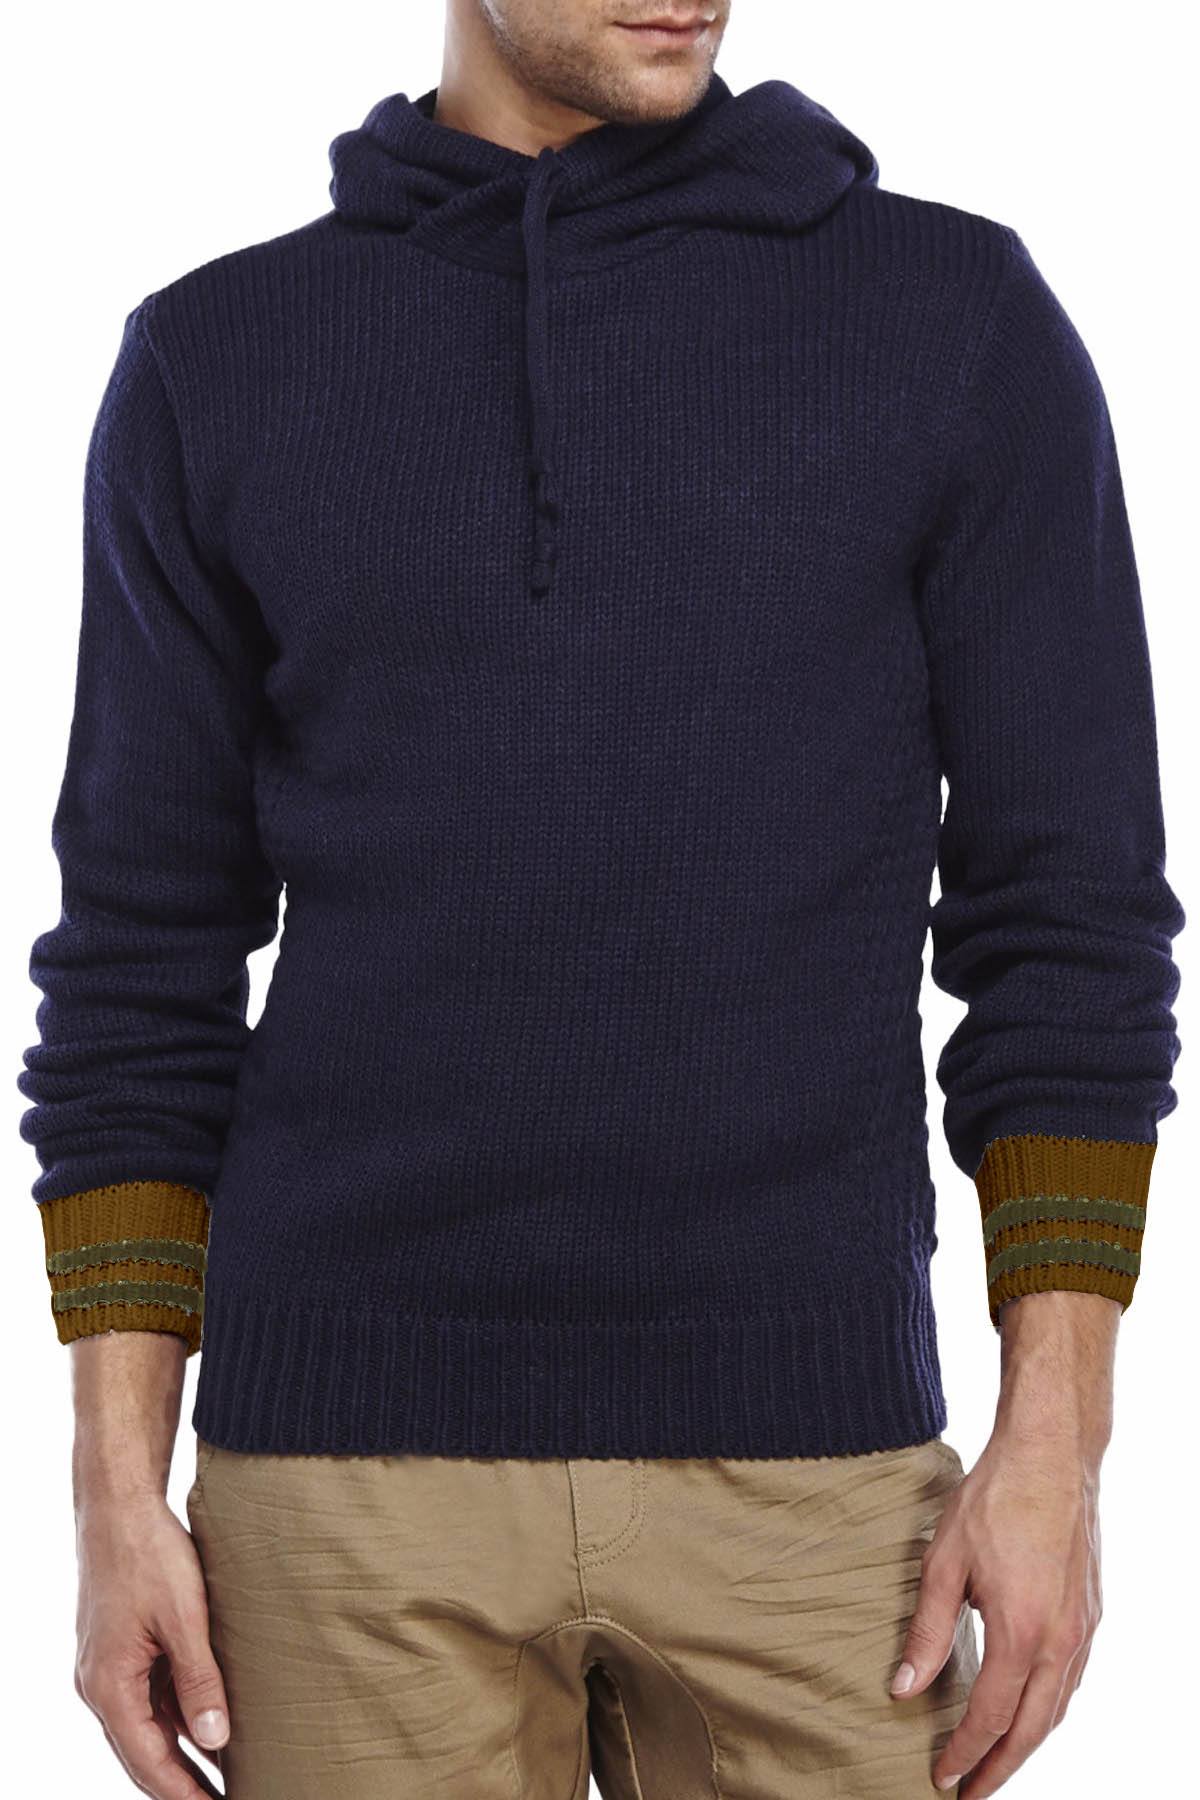 American Stitch Navy Draw String Knitted Hoodie